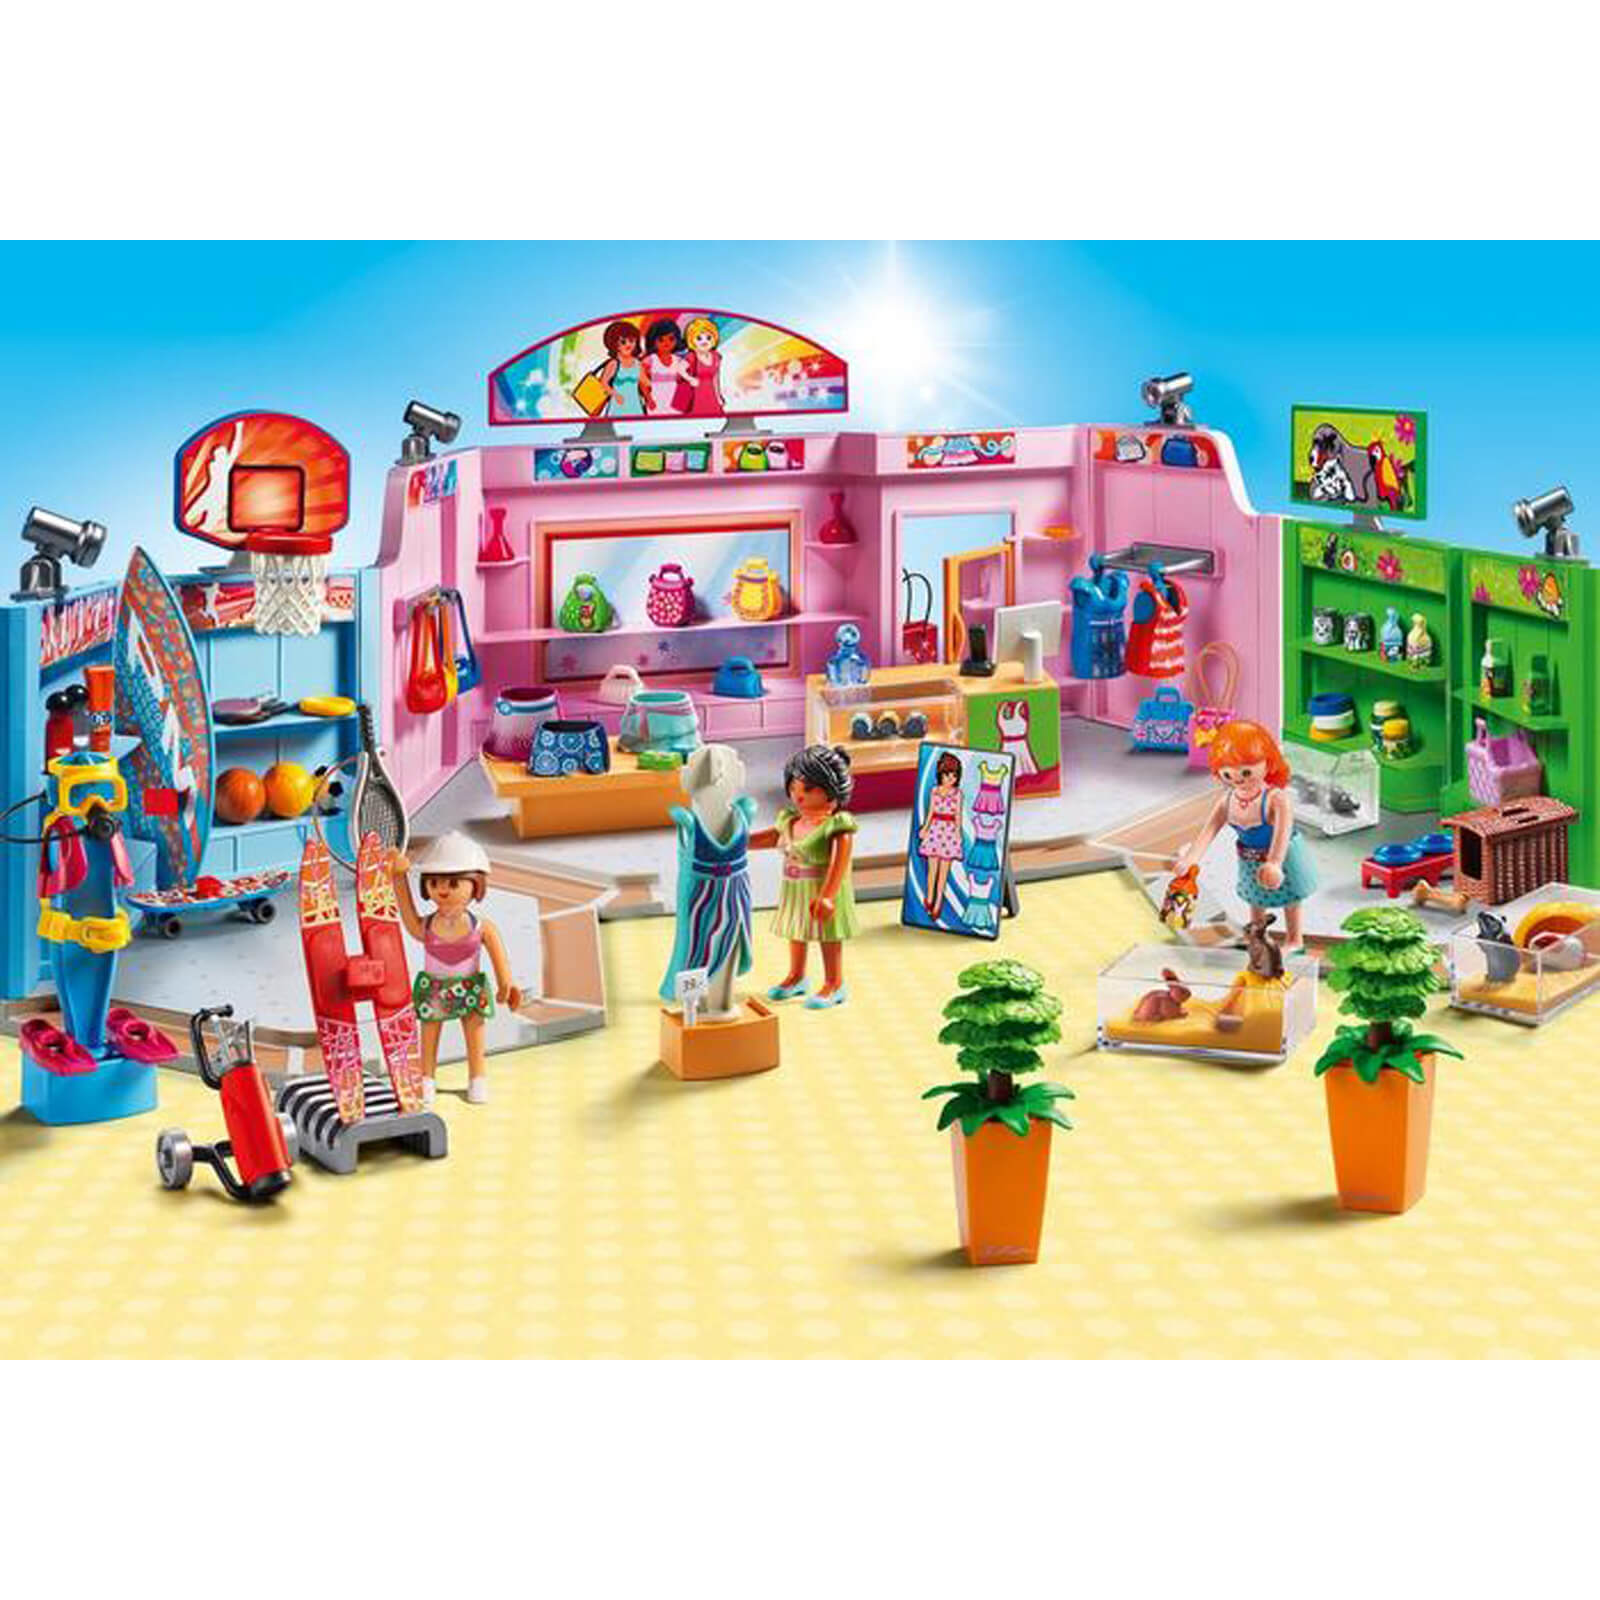 Playmobil City Life Shopping Plaza with Sports, Pet and Clothing Retailers (9078) 2